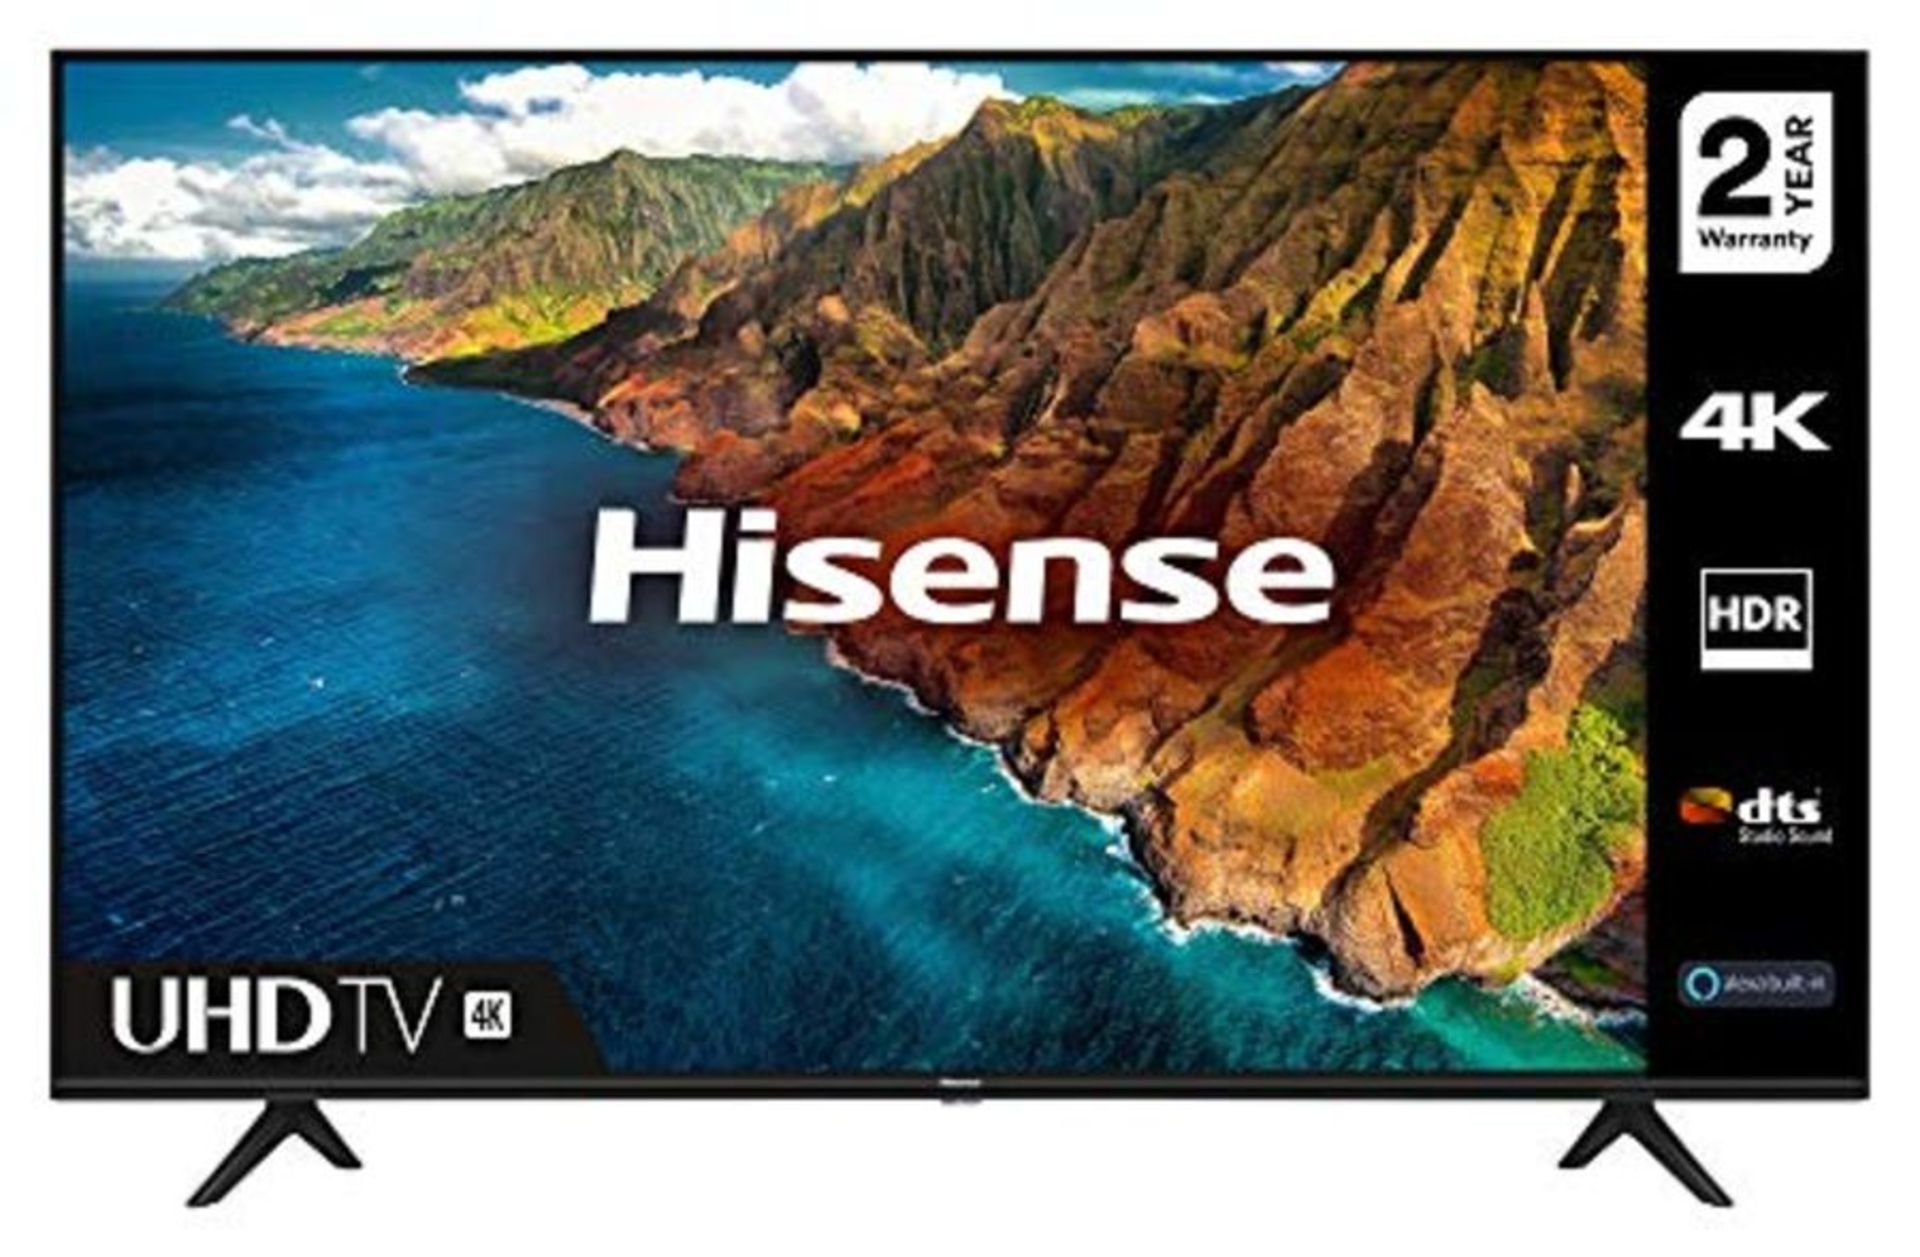 RRP £299.00 (Broken Screen) HISENSE 43AE7000FTUK 43-inch 4K UHD HDR Smart TV with Freeview play, a